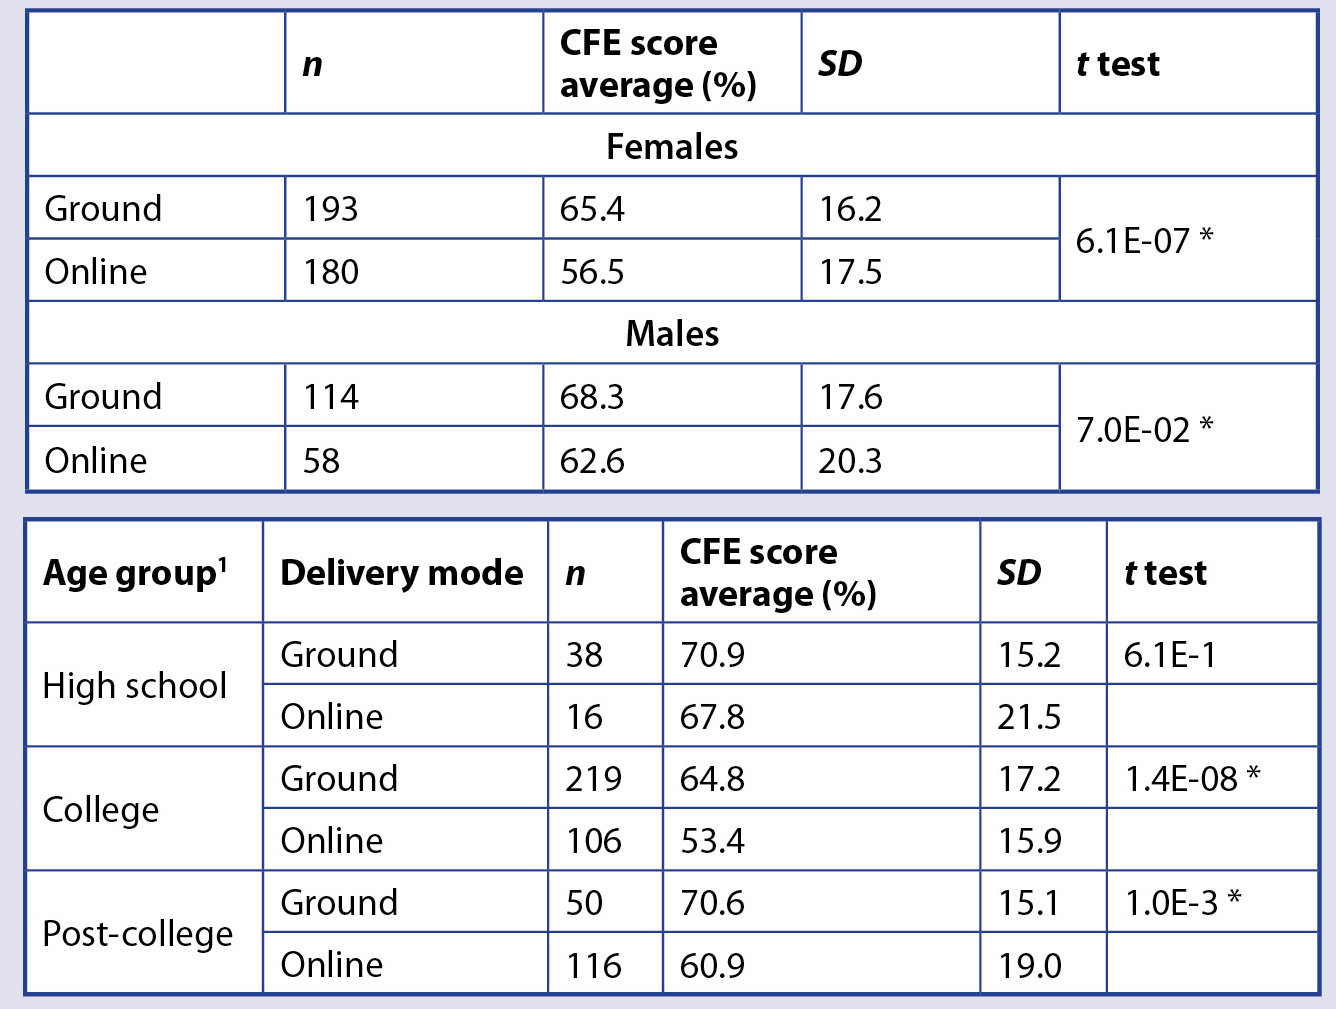 TABLE 4 (upper). Sample sizes, CFE score averages, standard deviations, and t test values comparing ground and online delivery modes by gender.